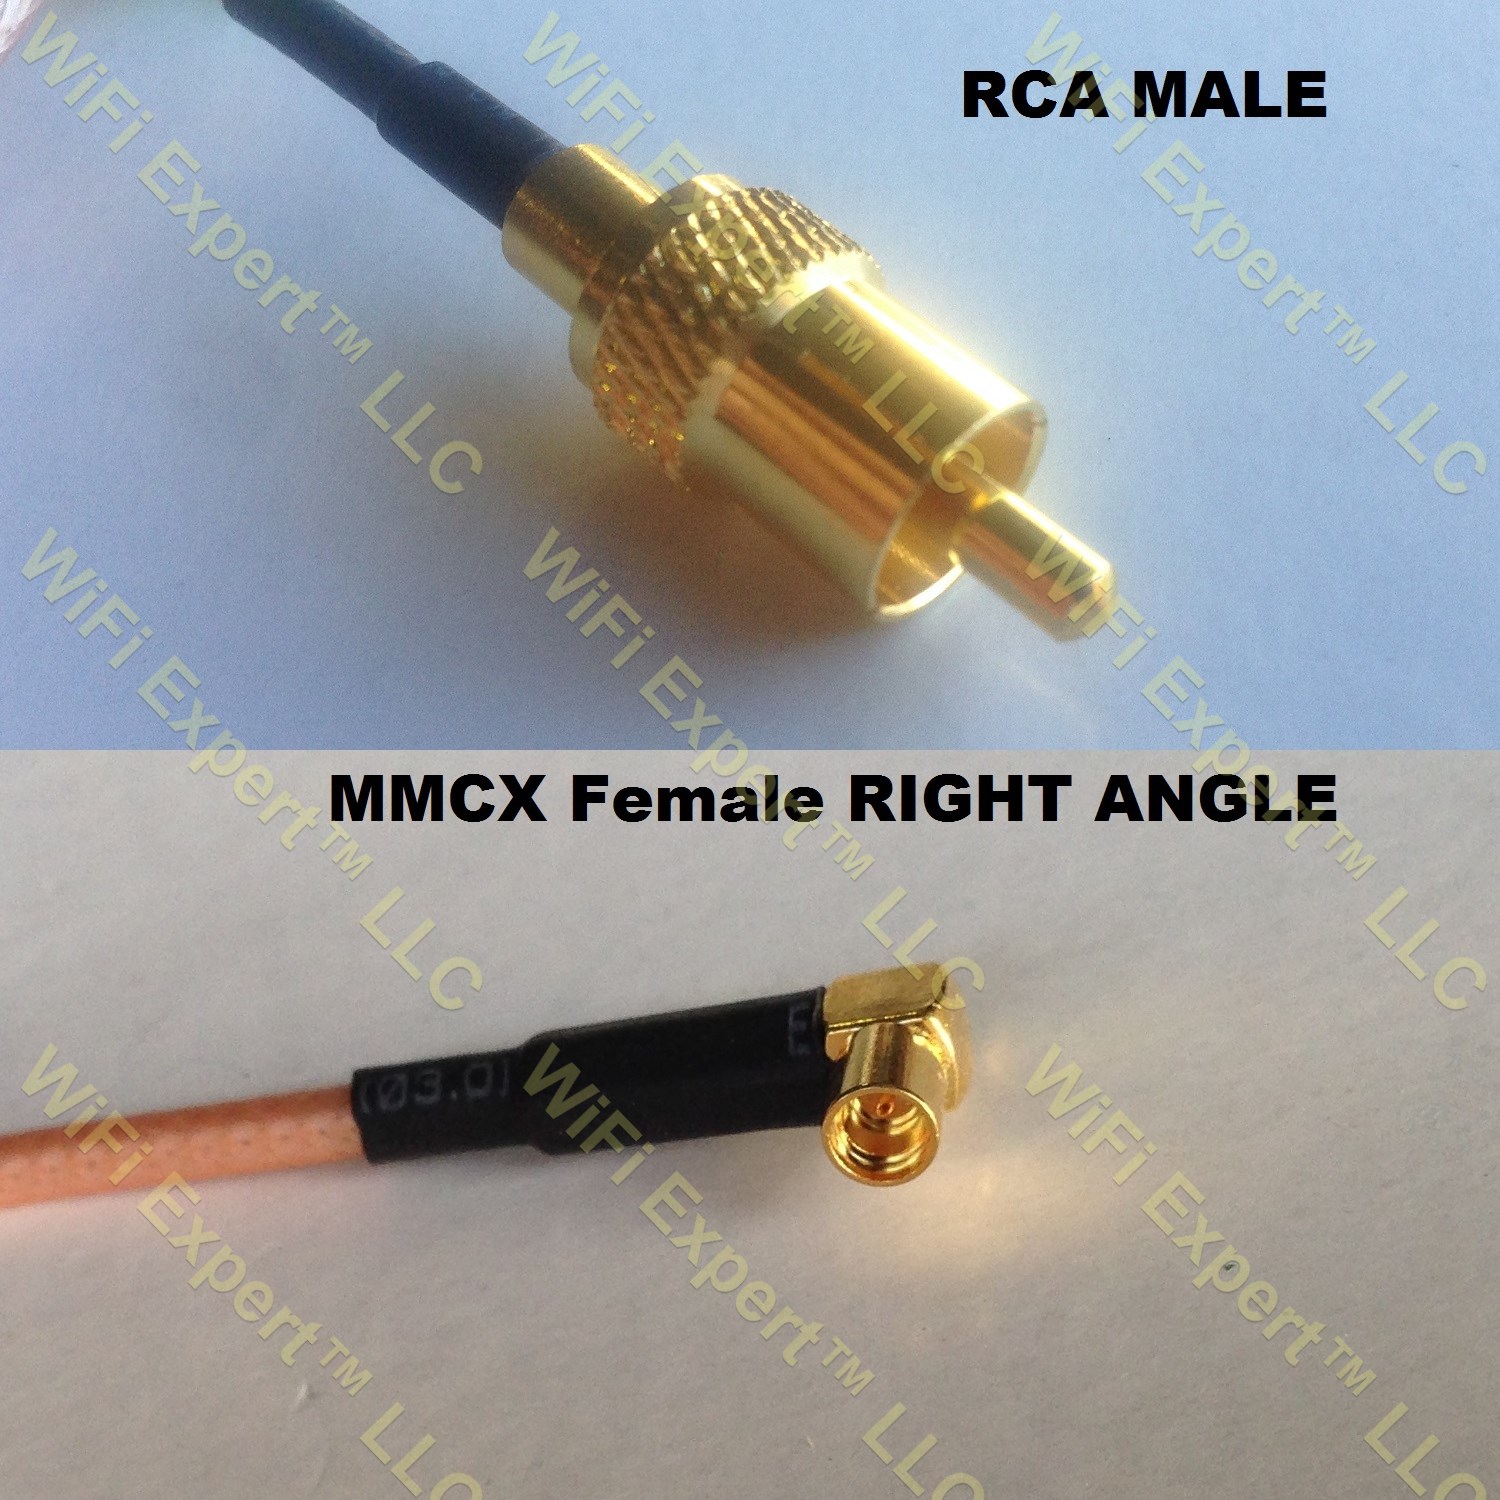 USA-CA RG188  SMB FEMALE ANGLE to RCA MALE Coaxial RF Pigtail Cable 